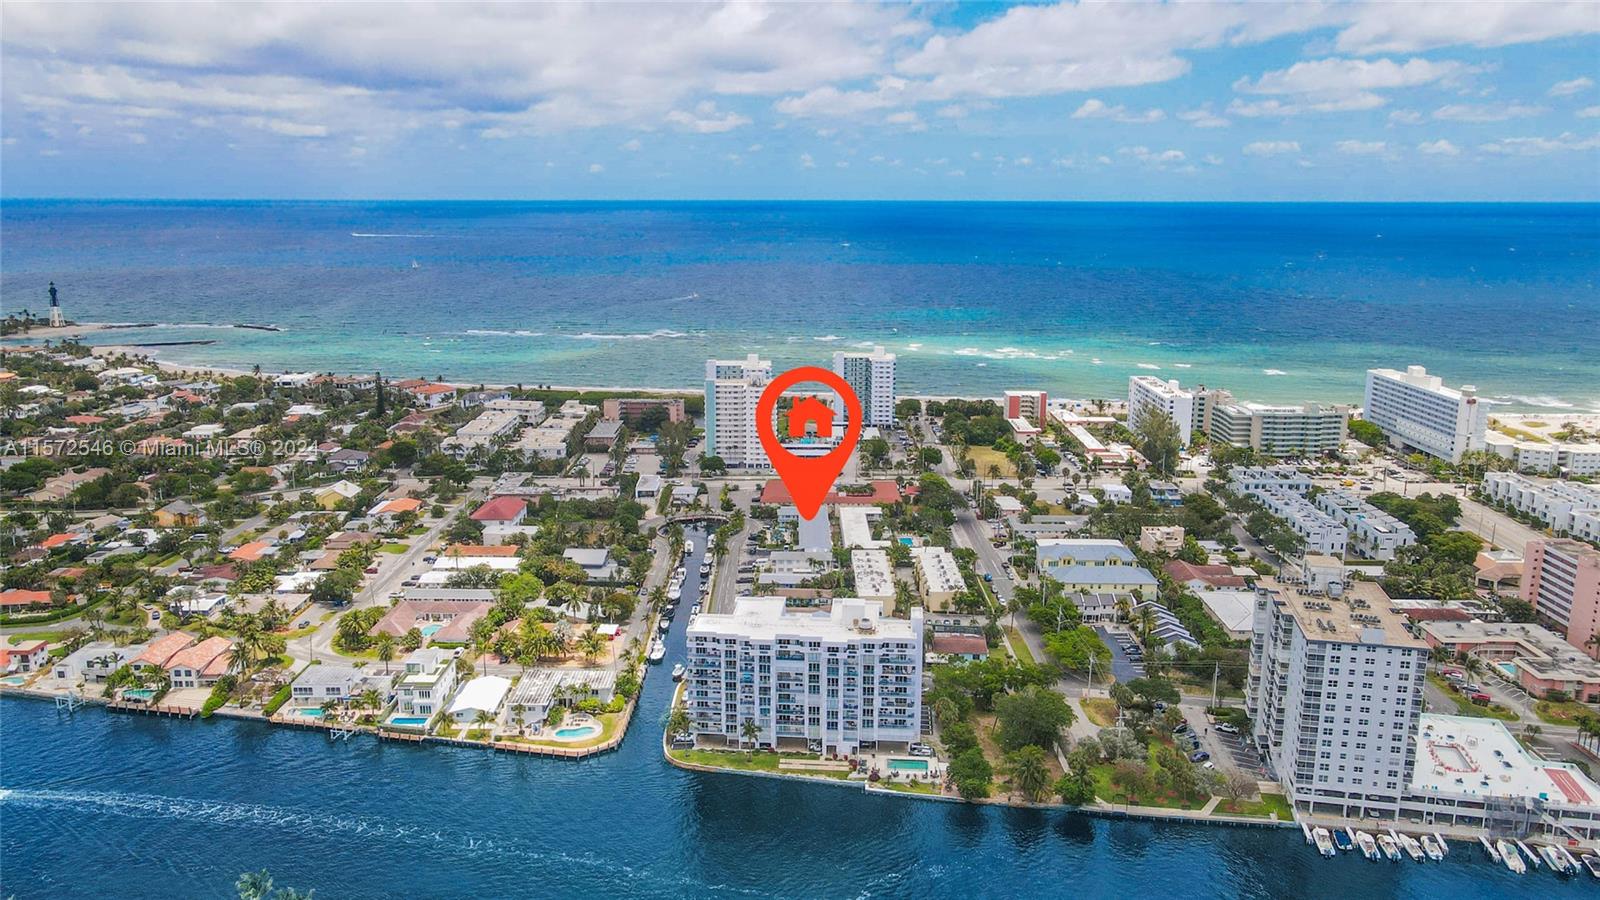 3232 Canal Dr 19, Pompano Beach, Florida 33062, 1 Bedroom Bedrooms, ,1 BathroomBathrooms,Residentiallease,For Rent,3232 Canal Dr 19,A11572546